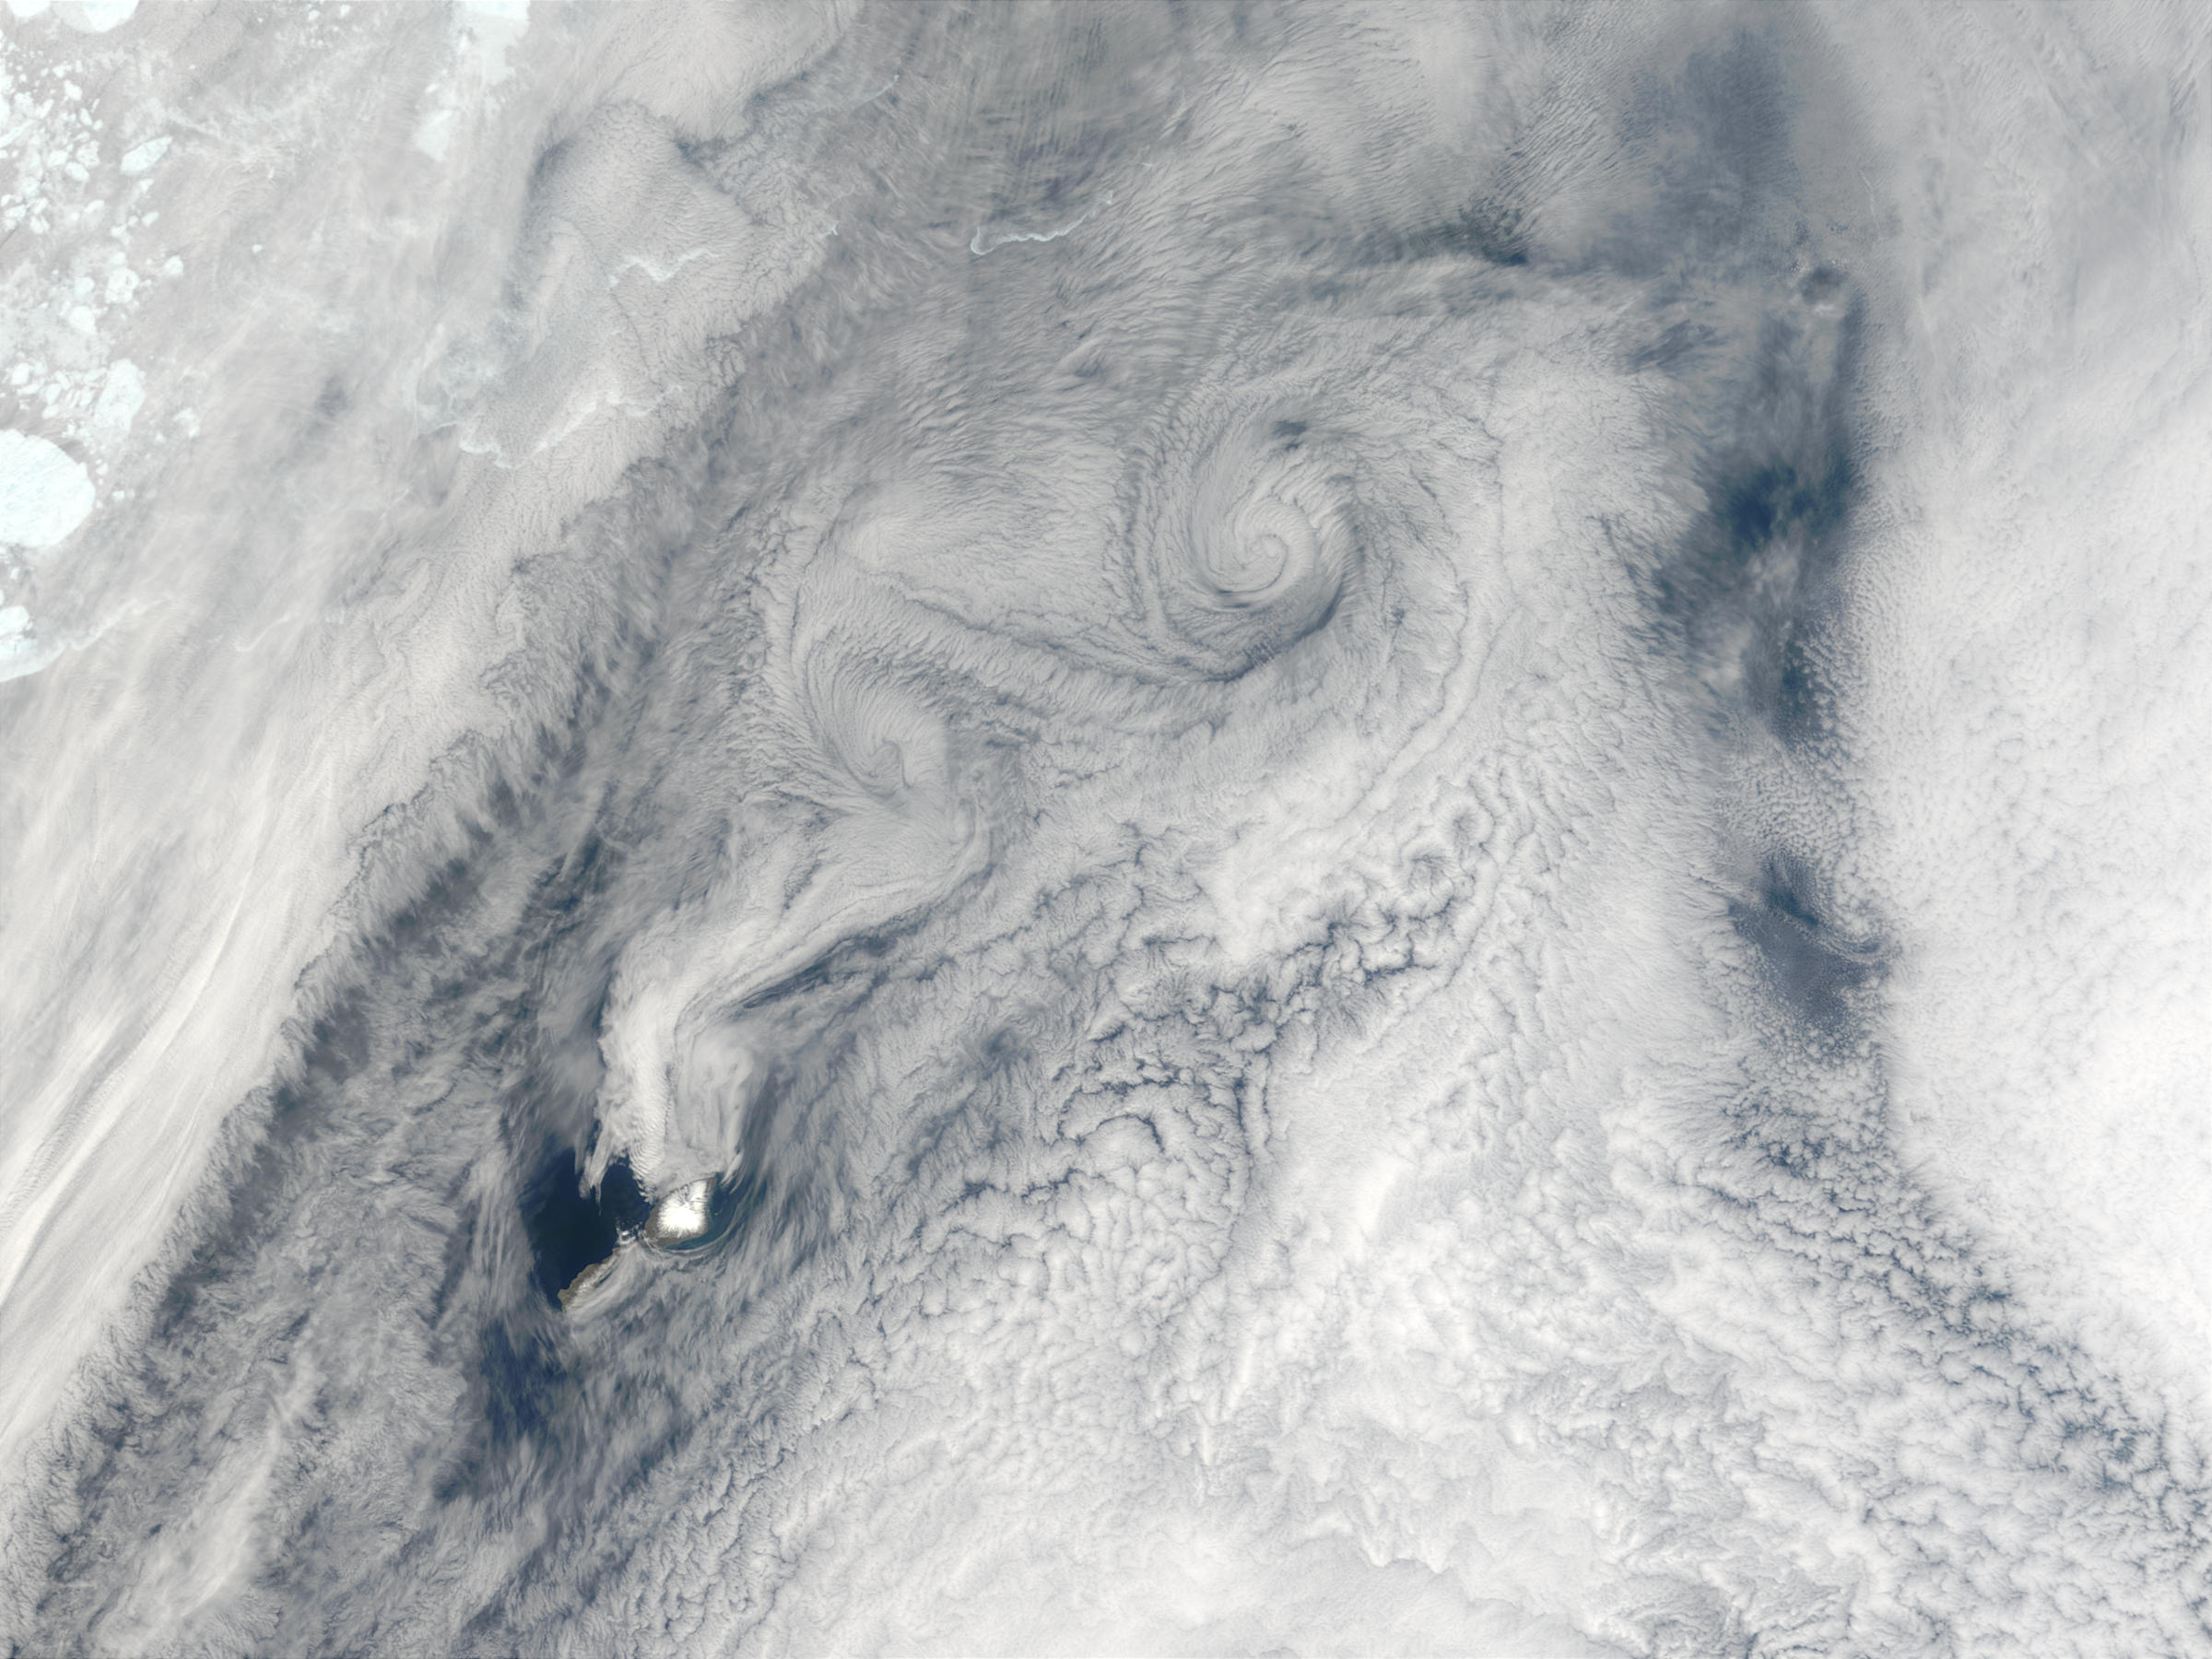 Cloud vortices off Jan Mayen Island, Greenland Sea - related image preview